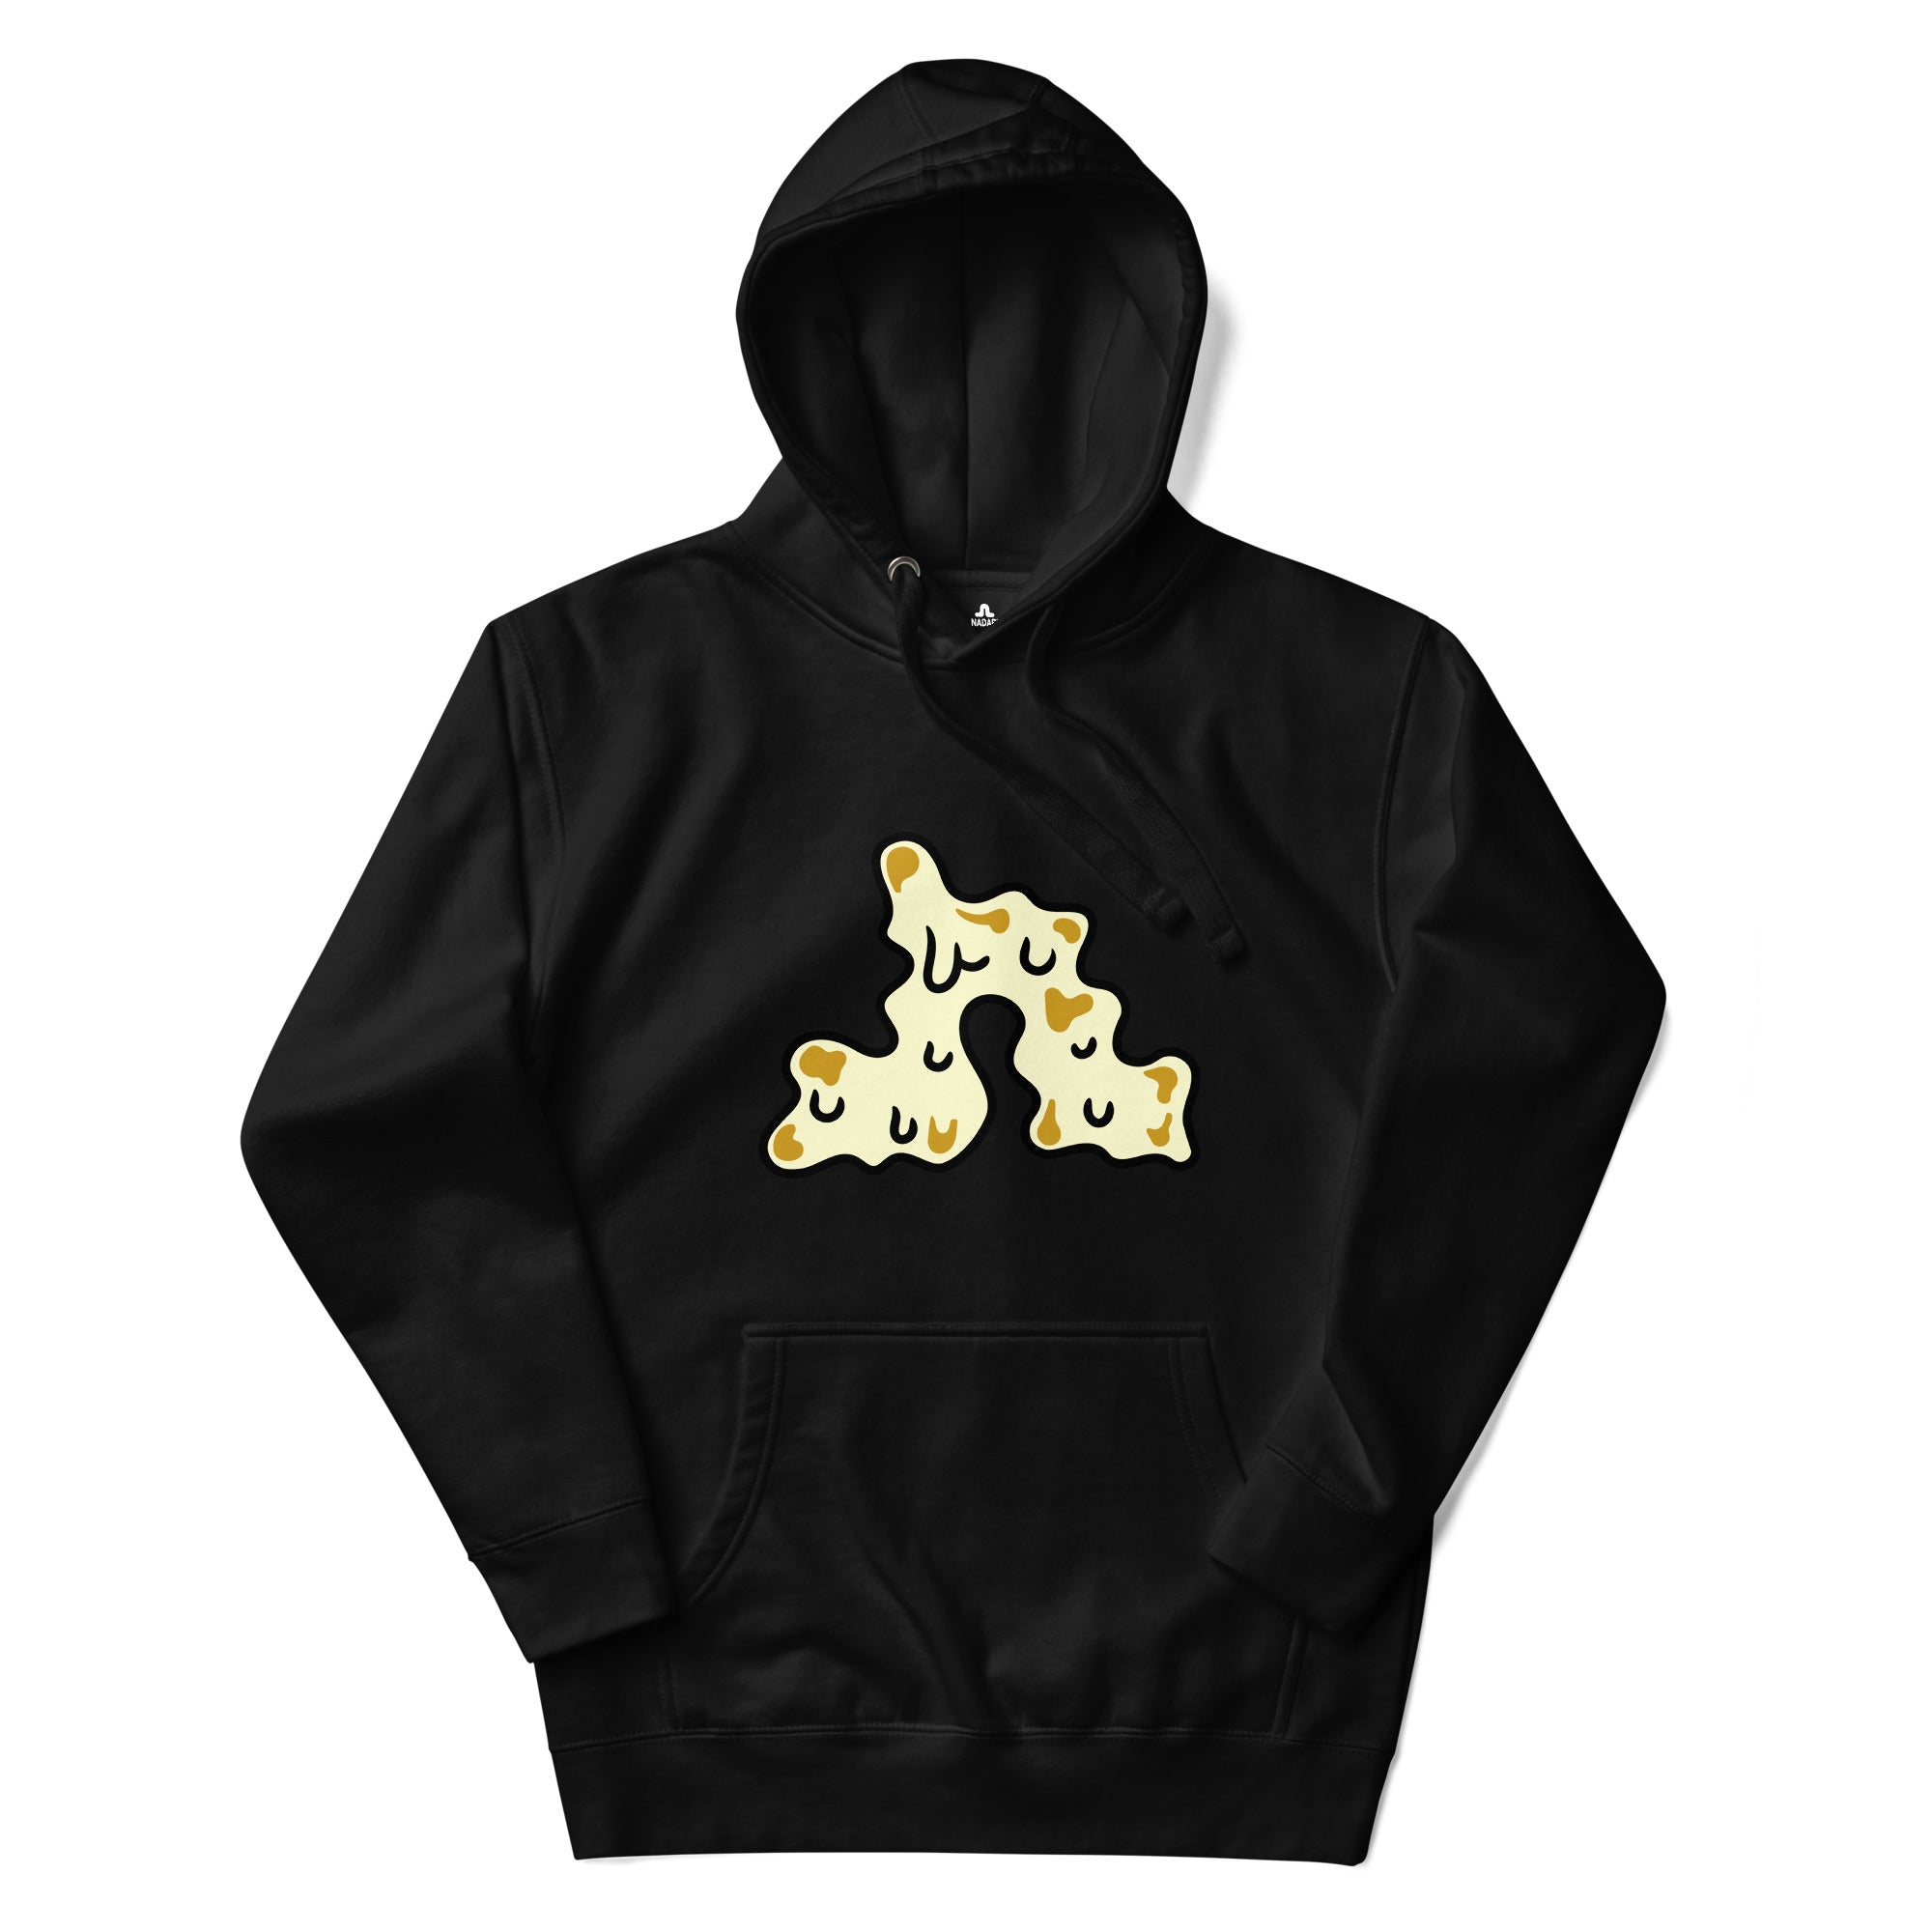 PURE Solo hoodie black, goldenrod and white.